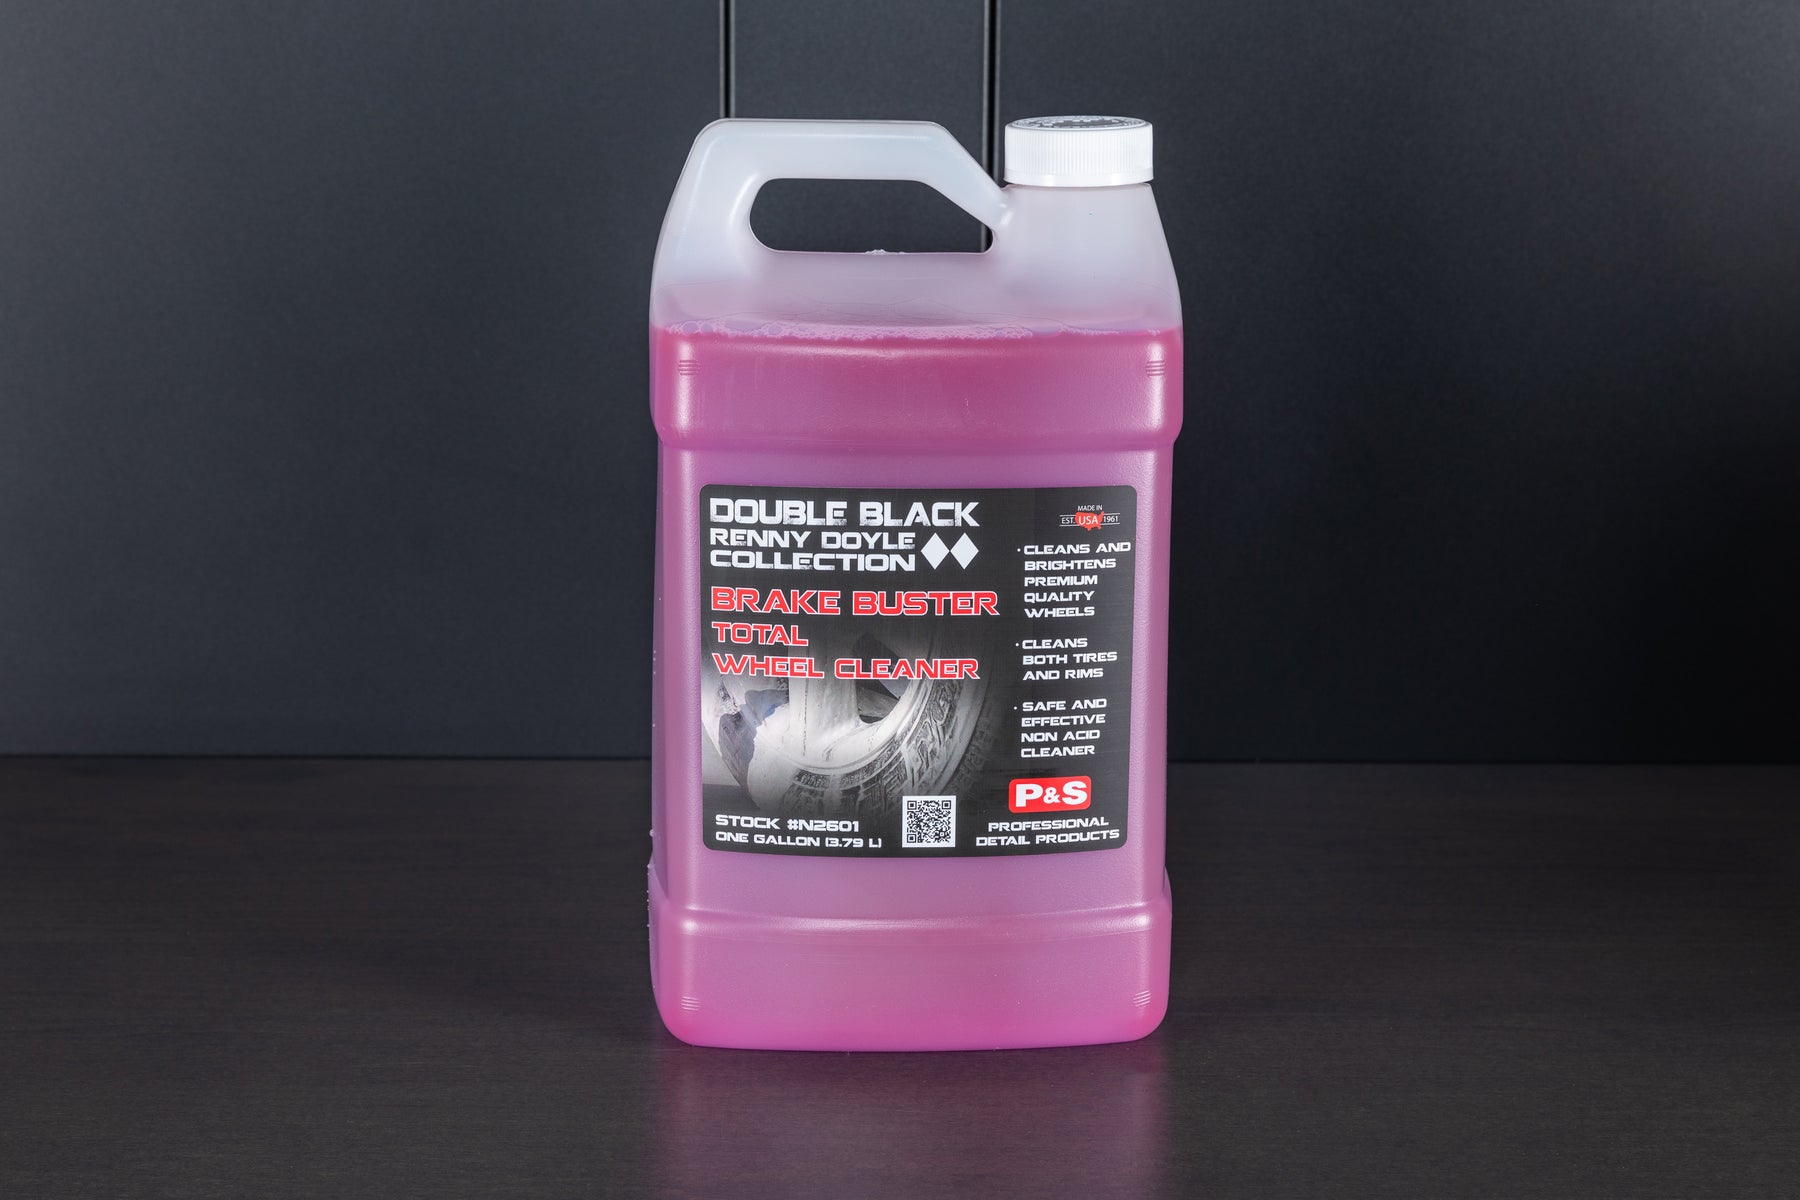 P&S Brake Buster Wheel & Tire Cleaner (Product Info)